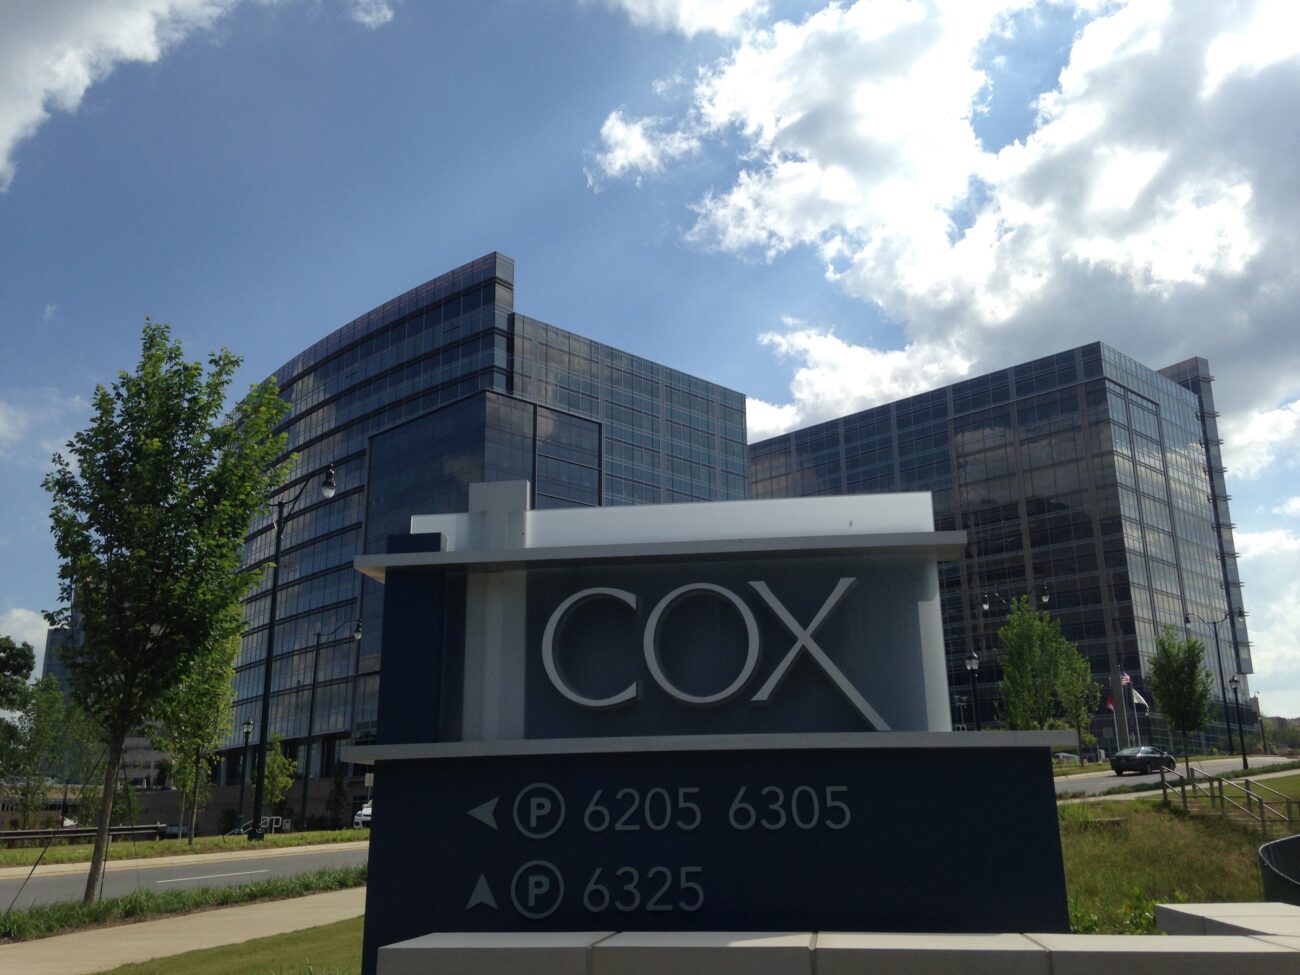 Cox Communications, founded in 1962 by James M. Cox, began as a small cable television company in Pennsylvania. Let's dive in.